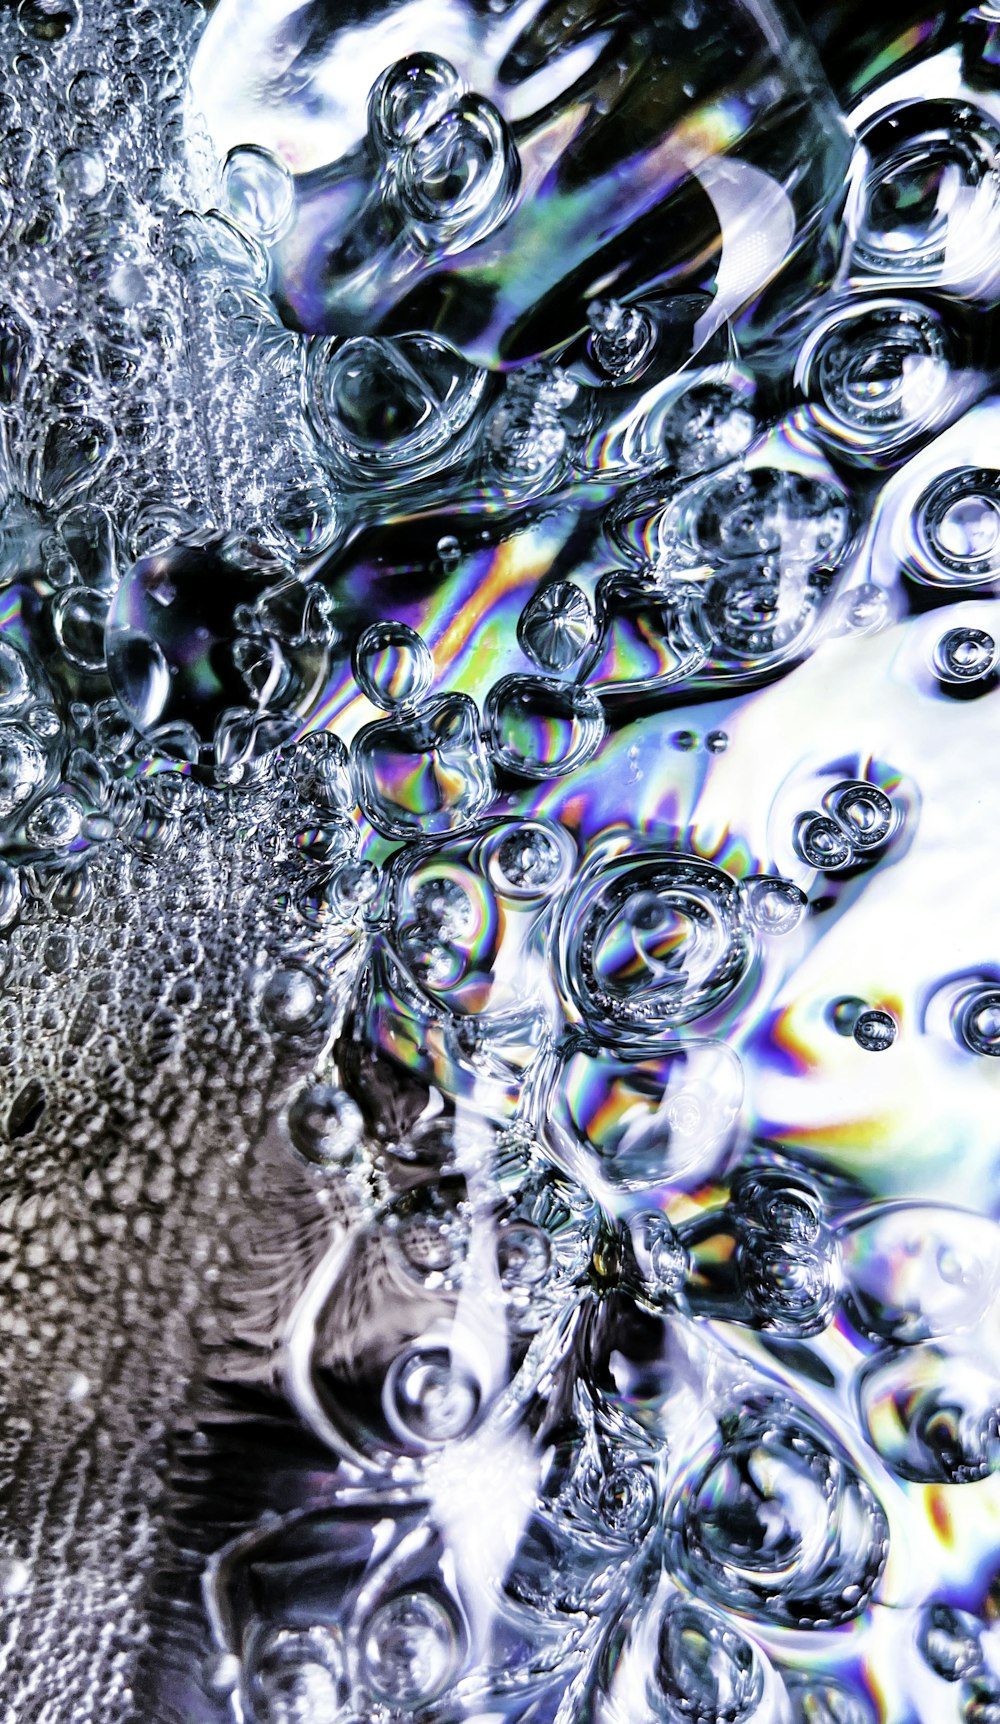 water droplets on glass surface